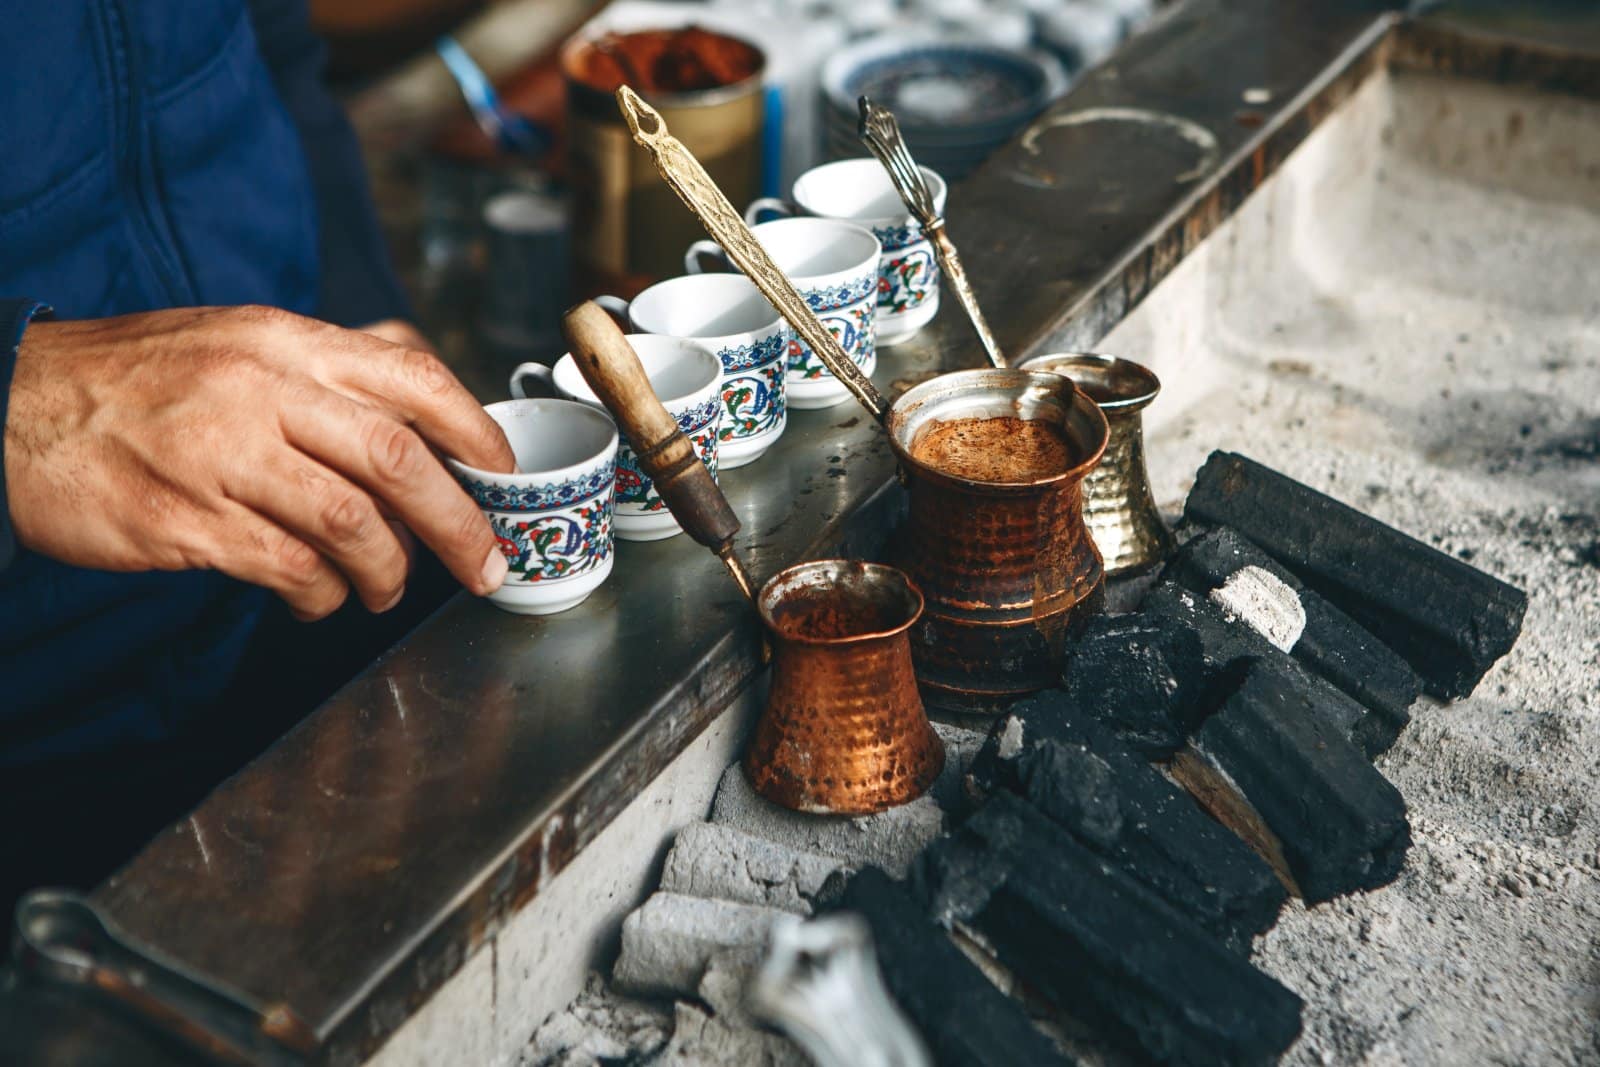 <p><span>In Istanbul, coffee is more than a drink; it symbolizes hospitality and friendship. Turkish coffee, known for its strong, unfiltered preparation, is often accompanied by a glass of water and sometimes a Turkish delight.</span></p> <p><span>Enjoying coffee in Istanbul is as much about the ritual and the setting as it is about the beverage itself. Visit a traditional kahvehane (coffee house) to observe locals playing backgammon or reading, with the lingering aroma of freshly ground coffee in the air.</span></p> <p><b>Insider’s Tip: </b><span>Try a cup of Turkish coffee at Mandabatmaz, known for its thick, velvety foam.</span></p> <p><b>When To Travel: </b><span>Visit during spring (April to May) or fall (September to November) for pleasant weather.</span></p> <p><b>How To Get There: </b><span>Istanbul is served by two main airports, Istanbul Airport and Sabiha Gökçen International Airport, both offering easy access to the city.</span></p>